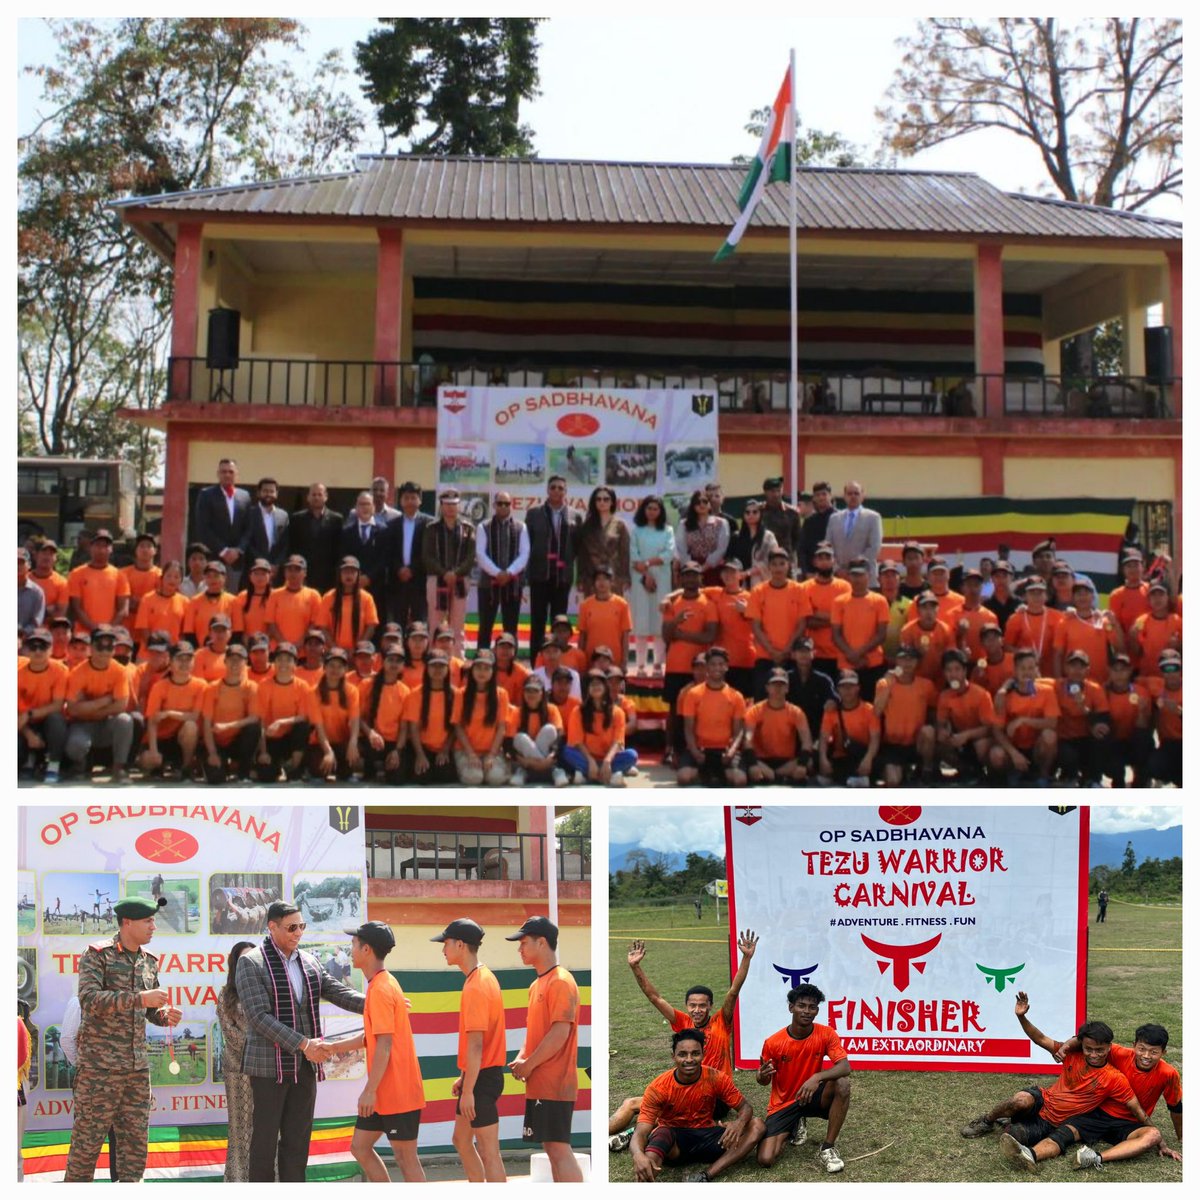 With an aim to inculcate the spirit of adventurism, fitness and camaraderie amongst the youth of Lohit, Anjaw, Namsai and Dibang Valley districts in #ArunachalPradesh, #SpearCorps, #IndianArmy organised the 𝗧𝗲𝘇𝘂 𝗪𝗮𝗿𝗿𝗶𝗼𝗿 𝗖𝗮𝗿𝗻𝗶𝘃𝗮𝗹 under #OperationSadbhavna…